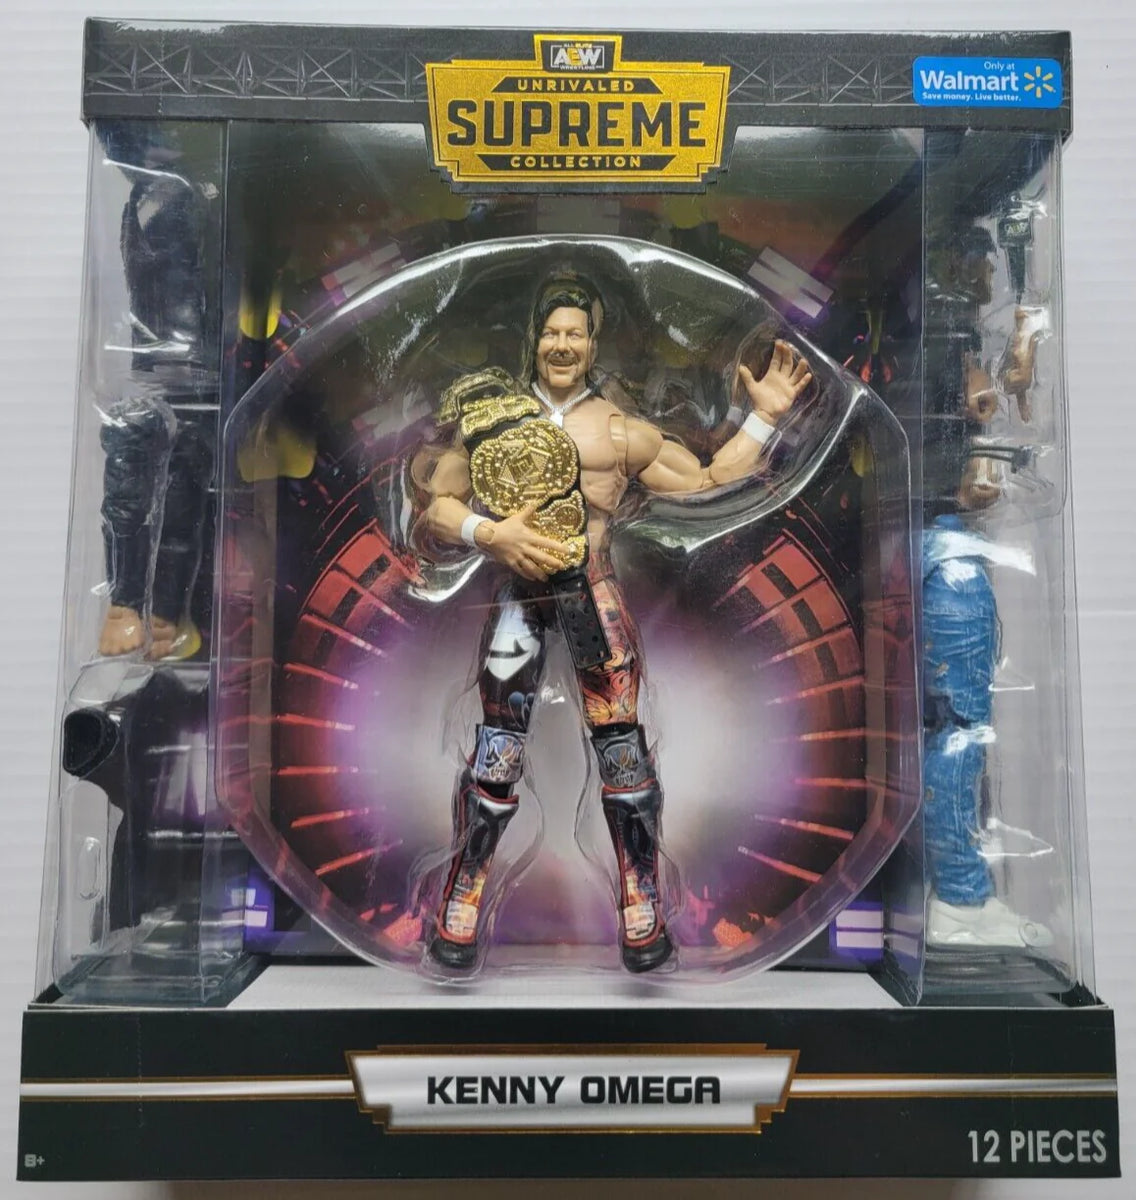 AEW Unrivaled Supreme Collection Walmart Exclusive Kenny Omega